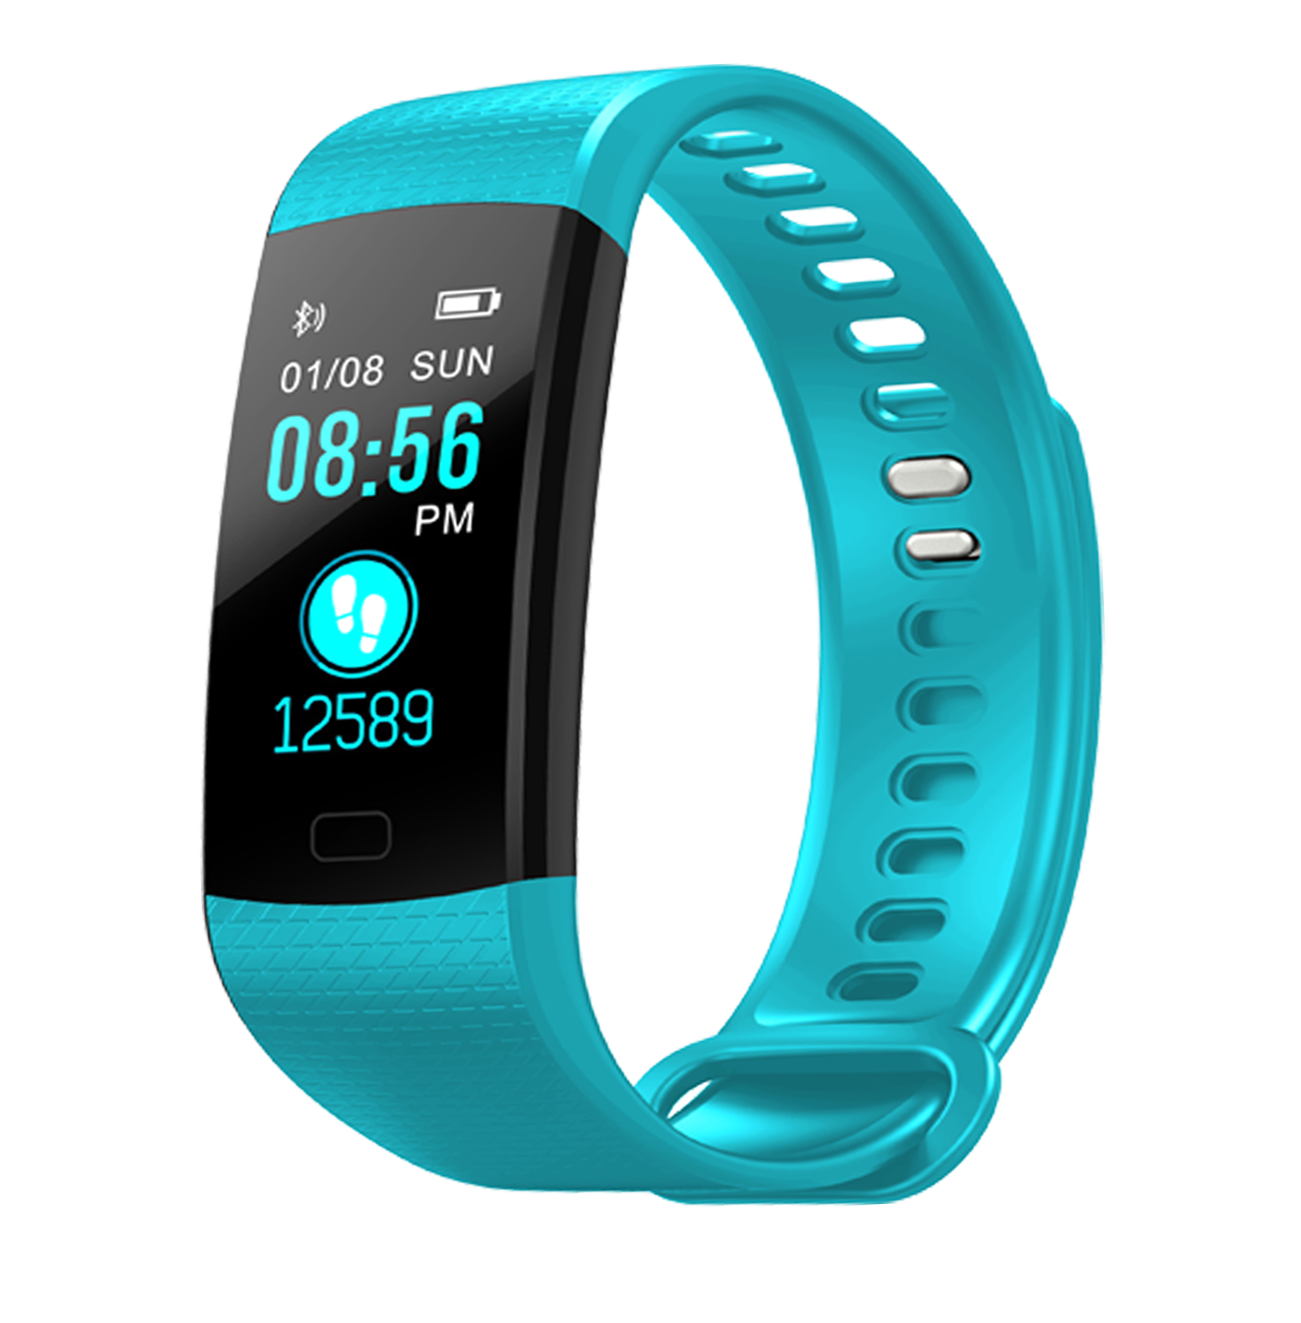 Fitness Tracker HR,fitness tracker with blood pressure monitor, Smart Fitness Band with Step Counter, Calorie Counter, Pedometer device(TURQUOISE) - image 1 of 8